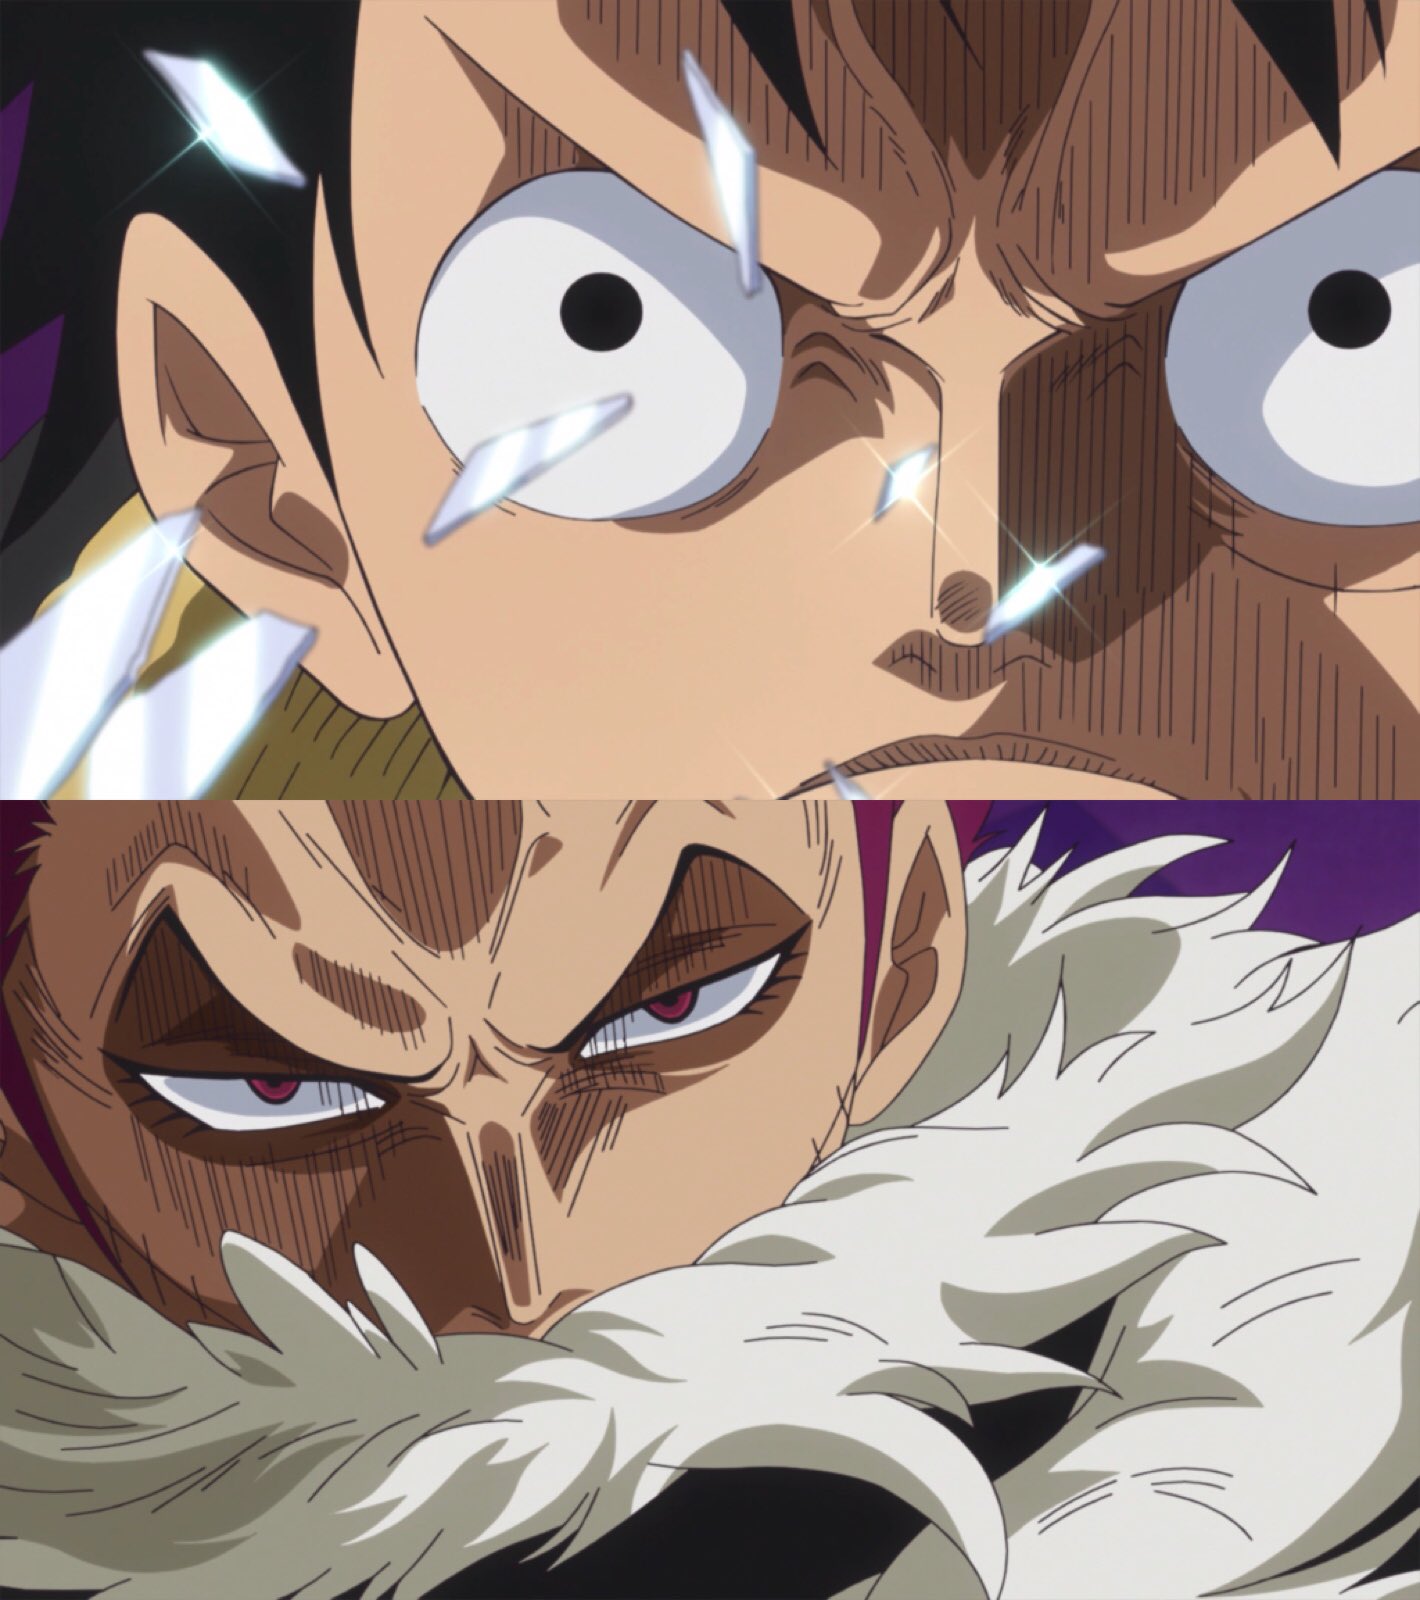 Brothere ワンピース Onepiece Ep 850 Luffy Vs Katakuri Begins Carrot Mini Backstory Her Relationship With Pedro The Sunny Manages To Escape For The Moment With The Coup De Burst